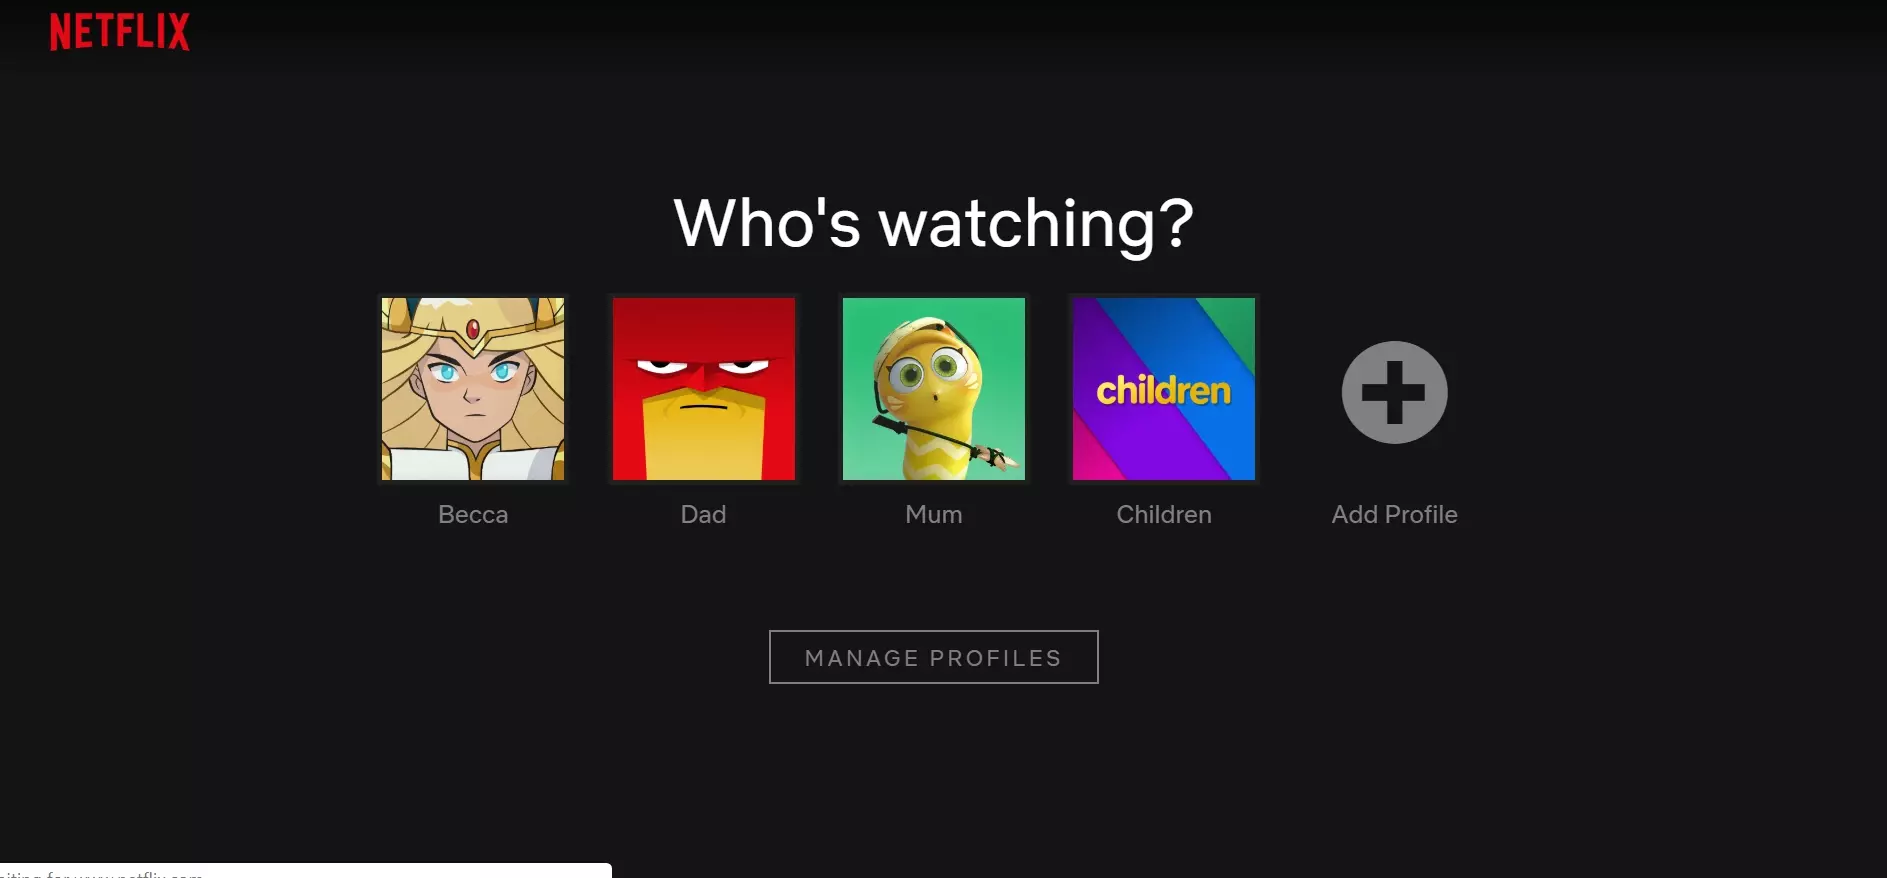 Netflix Account selection showing family members.